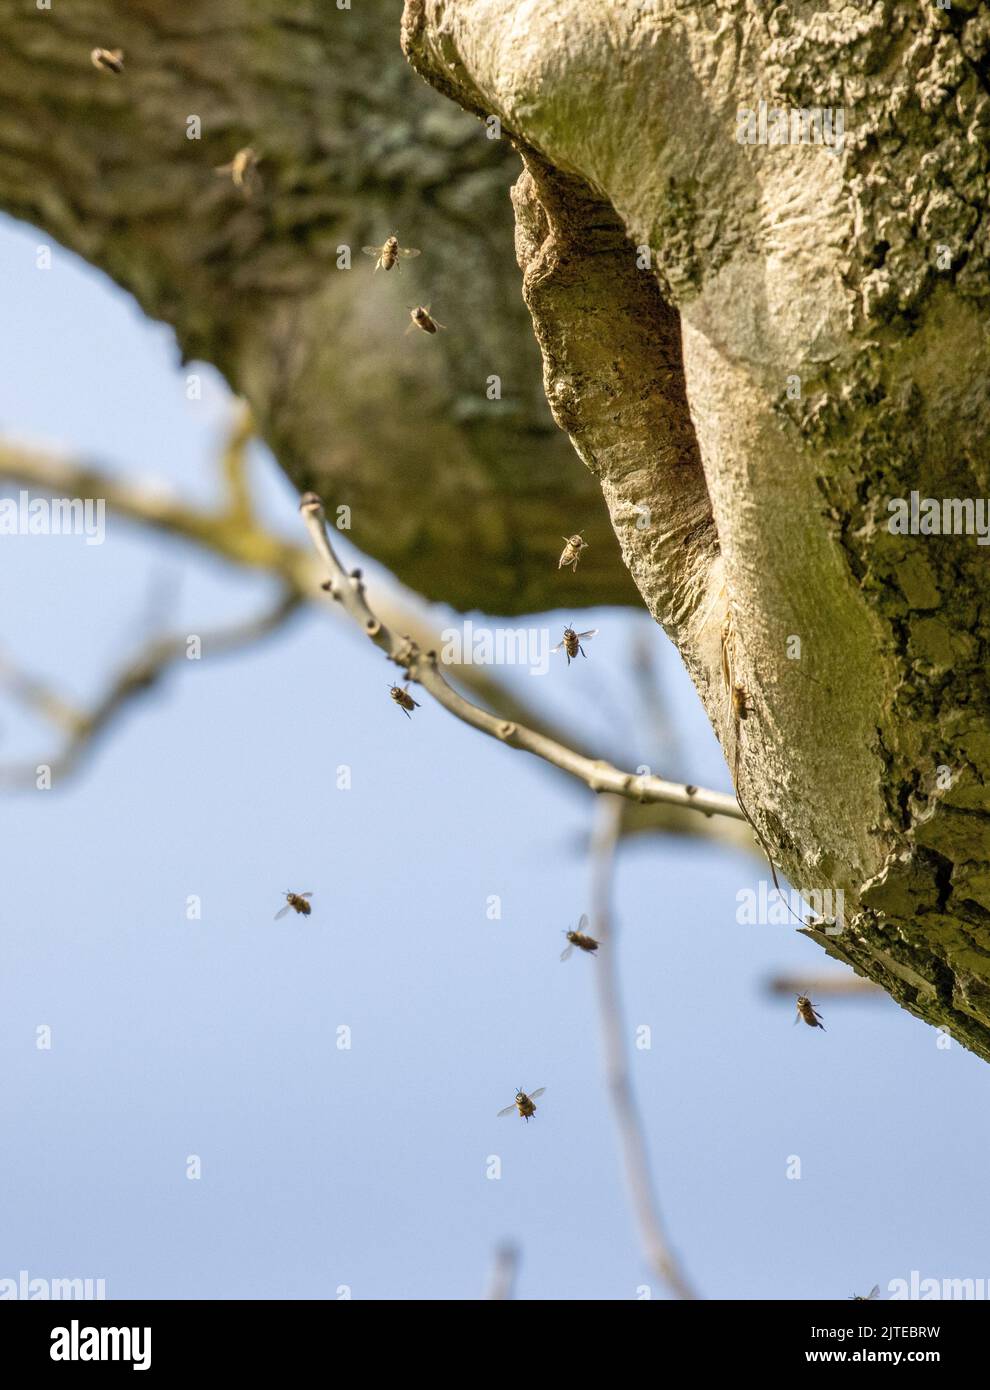 Honey bees (apis mellifera) nesting and flying into a hole in a tree trunk of a hollow tree, West Yorkshire, England, UK wildlife Stock Photo